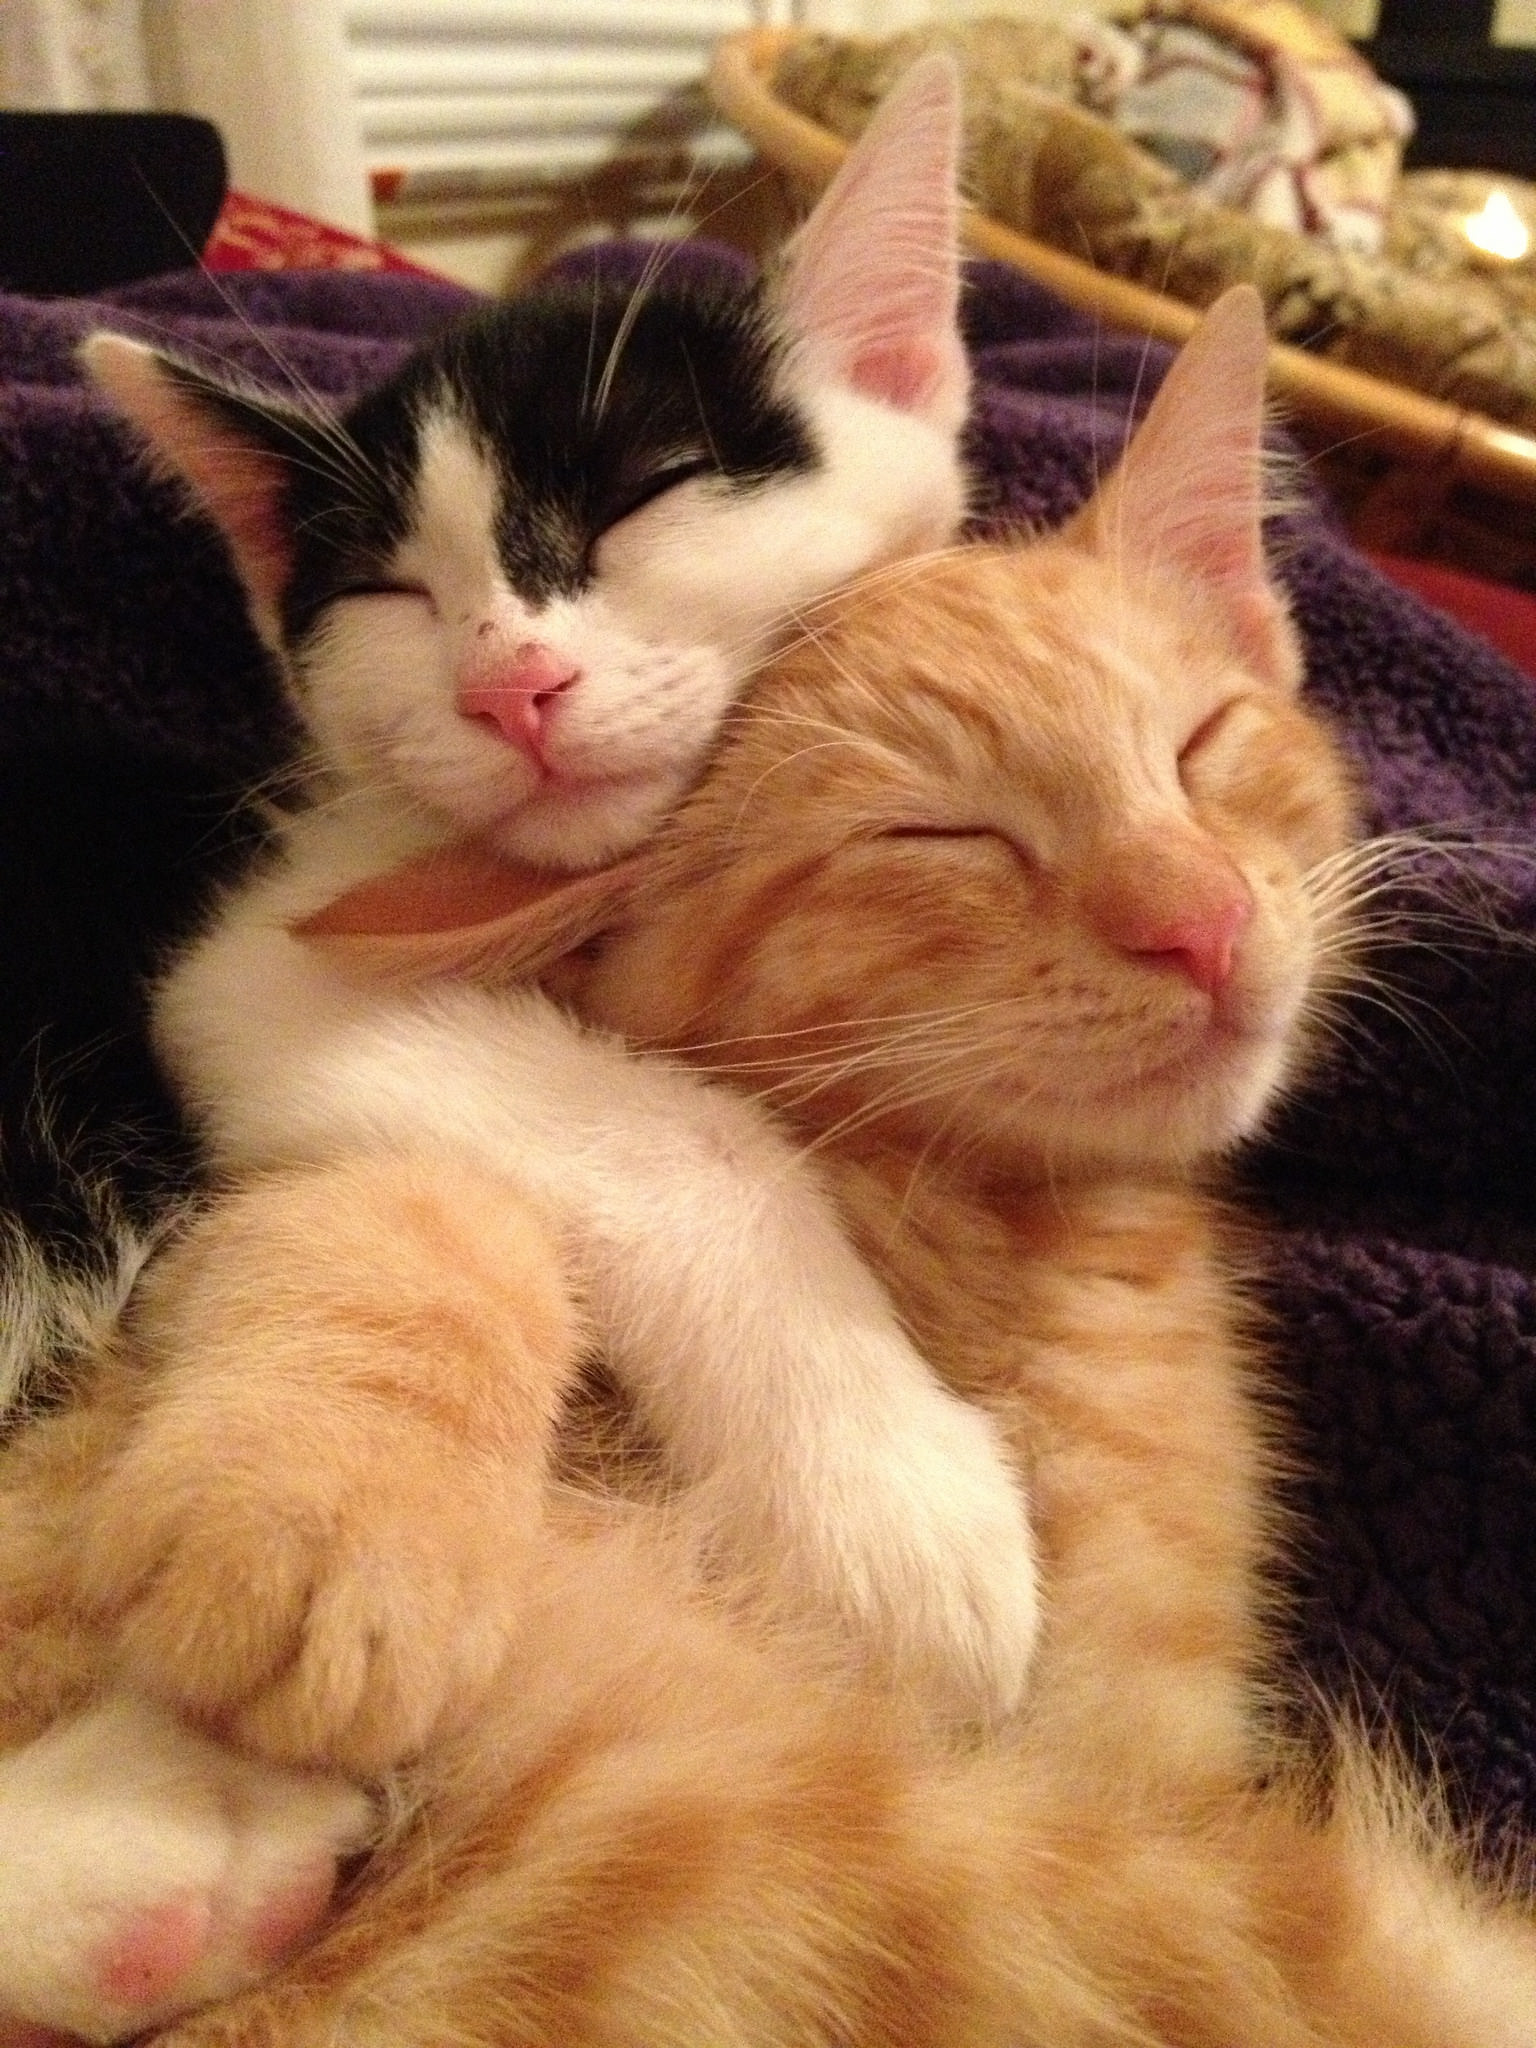 18 Hugging Cats Is The Cutest Thing You Will See All Day